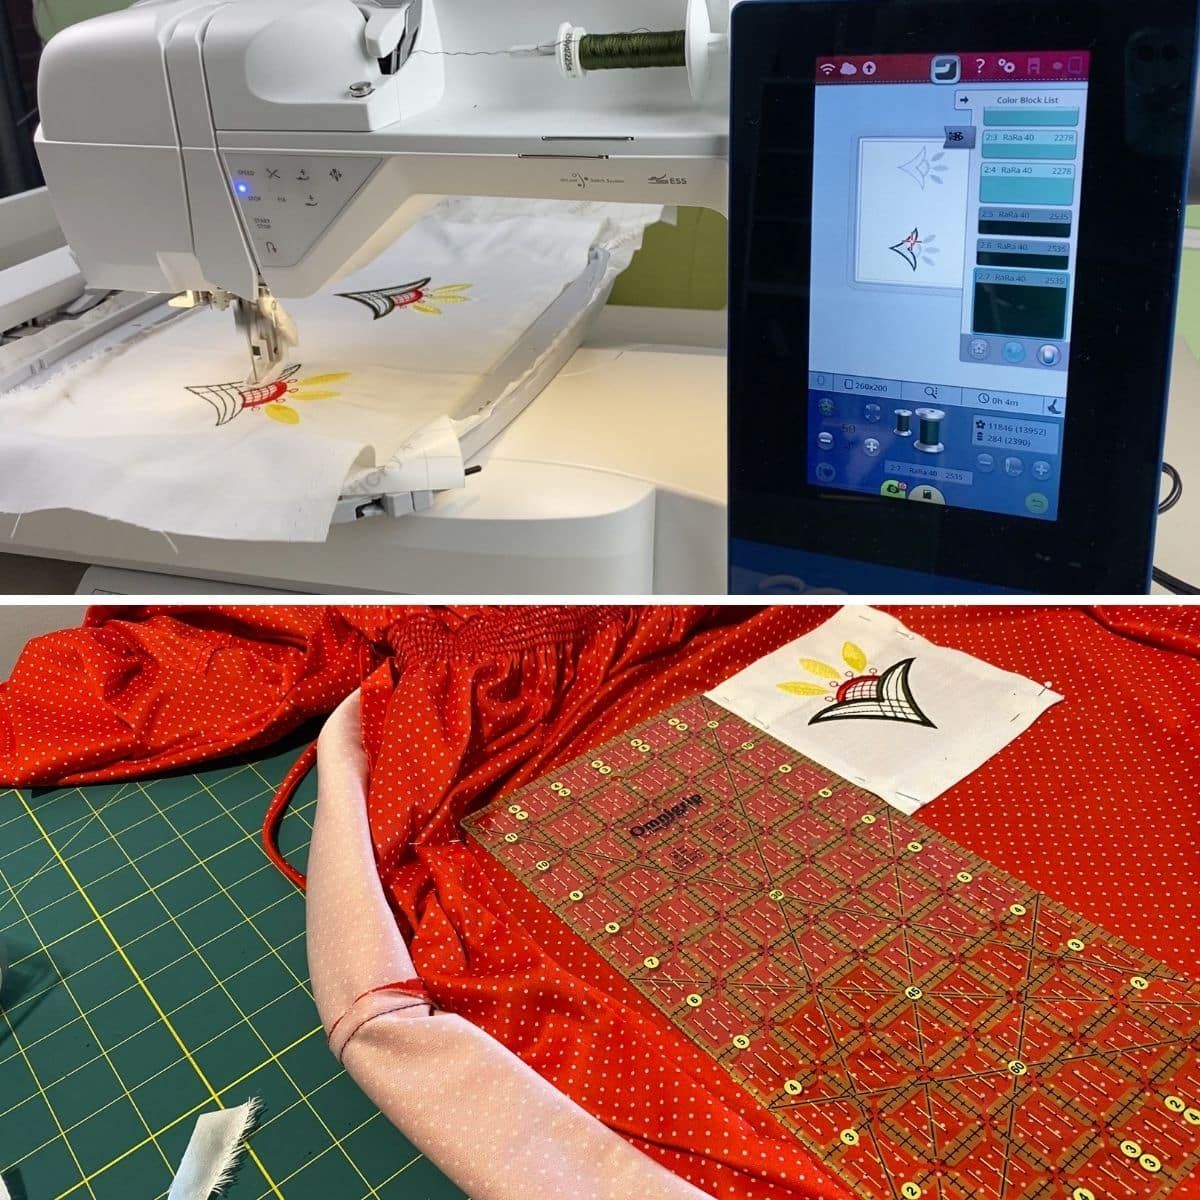 Sew it goes: The Sewing Machine Project stitches lives back together 